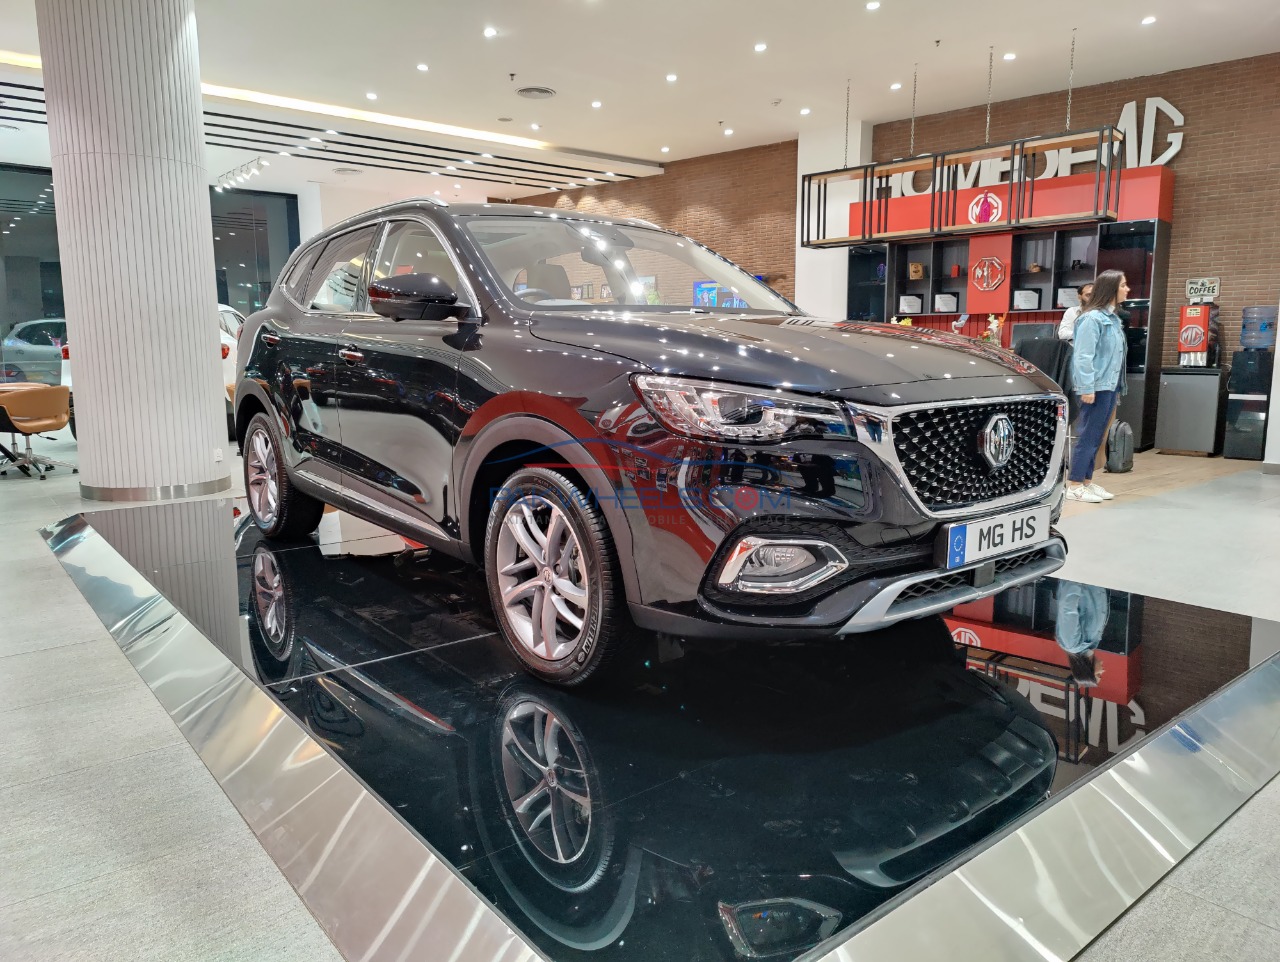 Locally assembled MG HS Essence